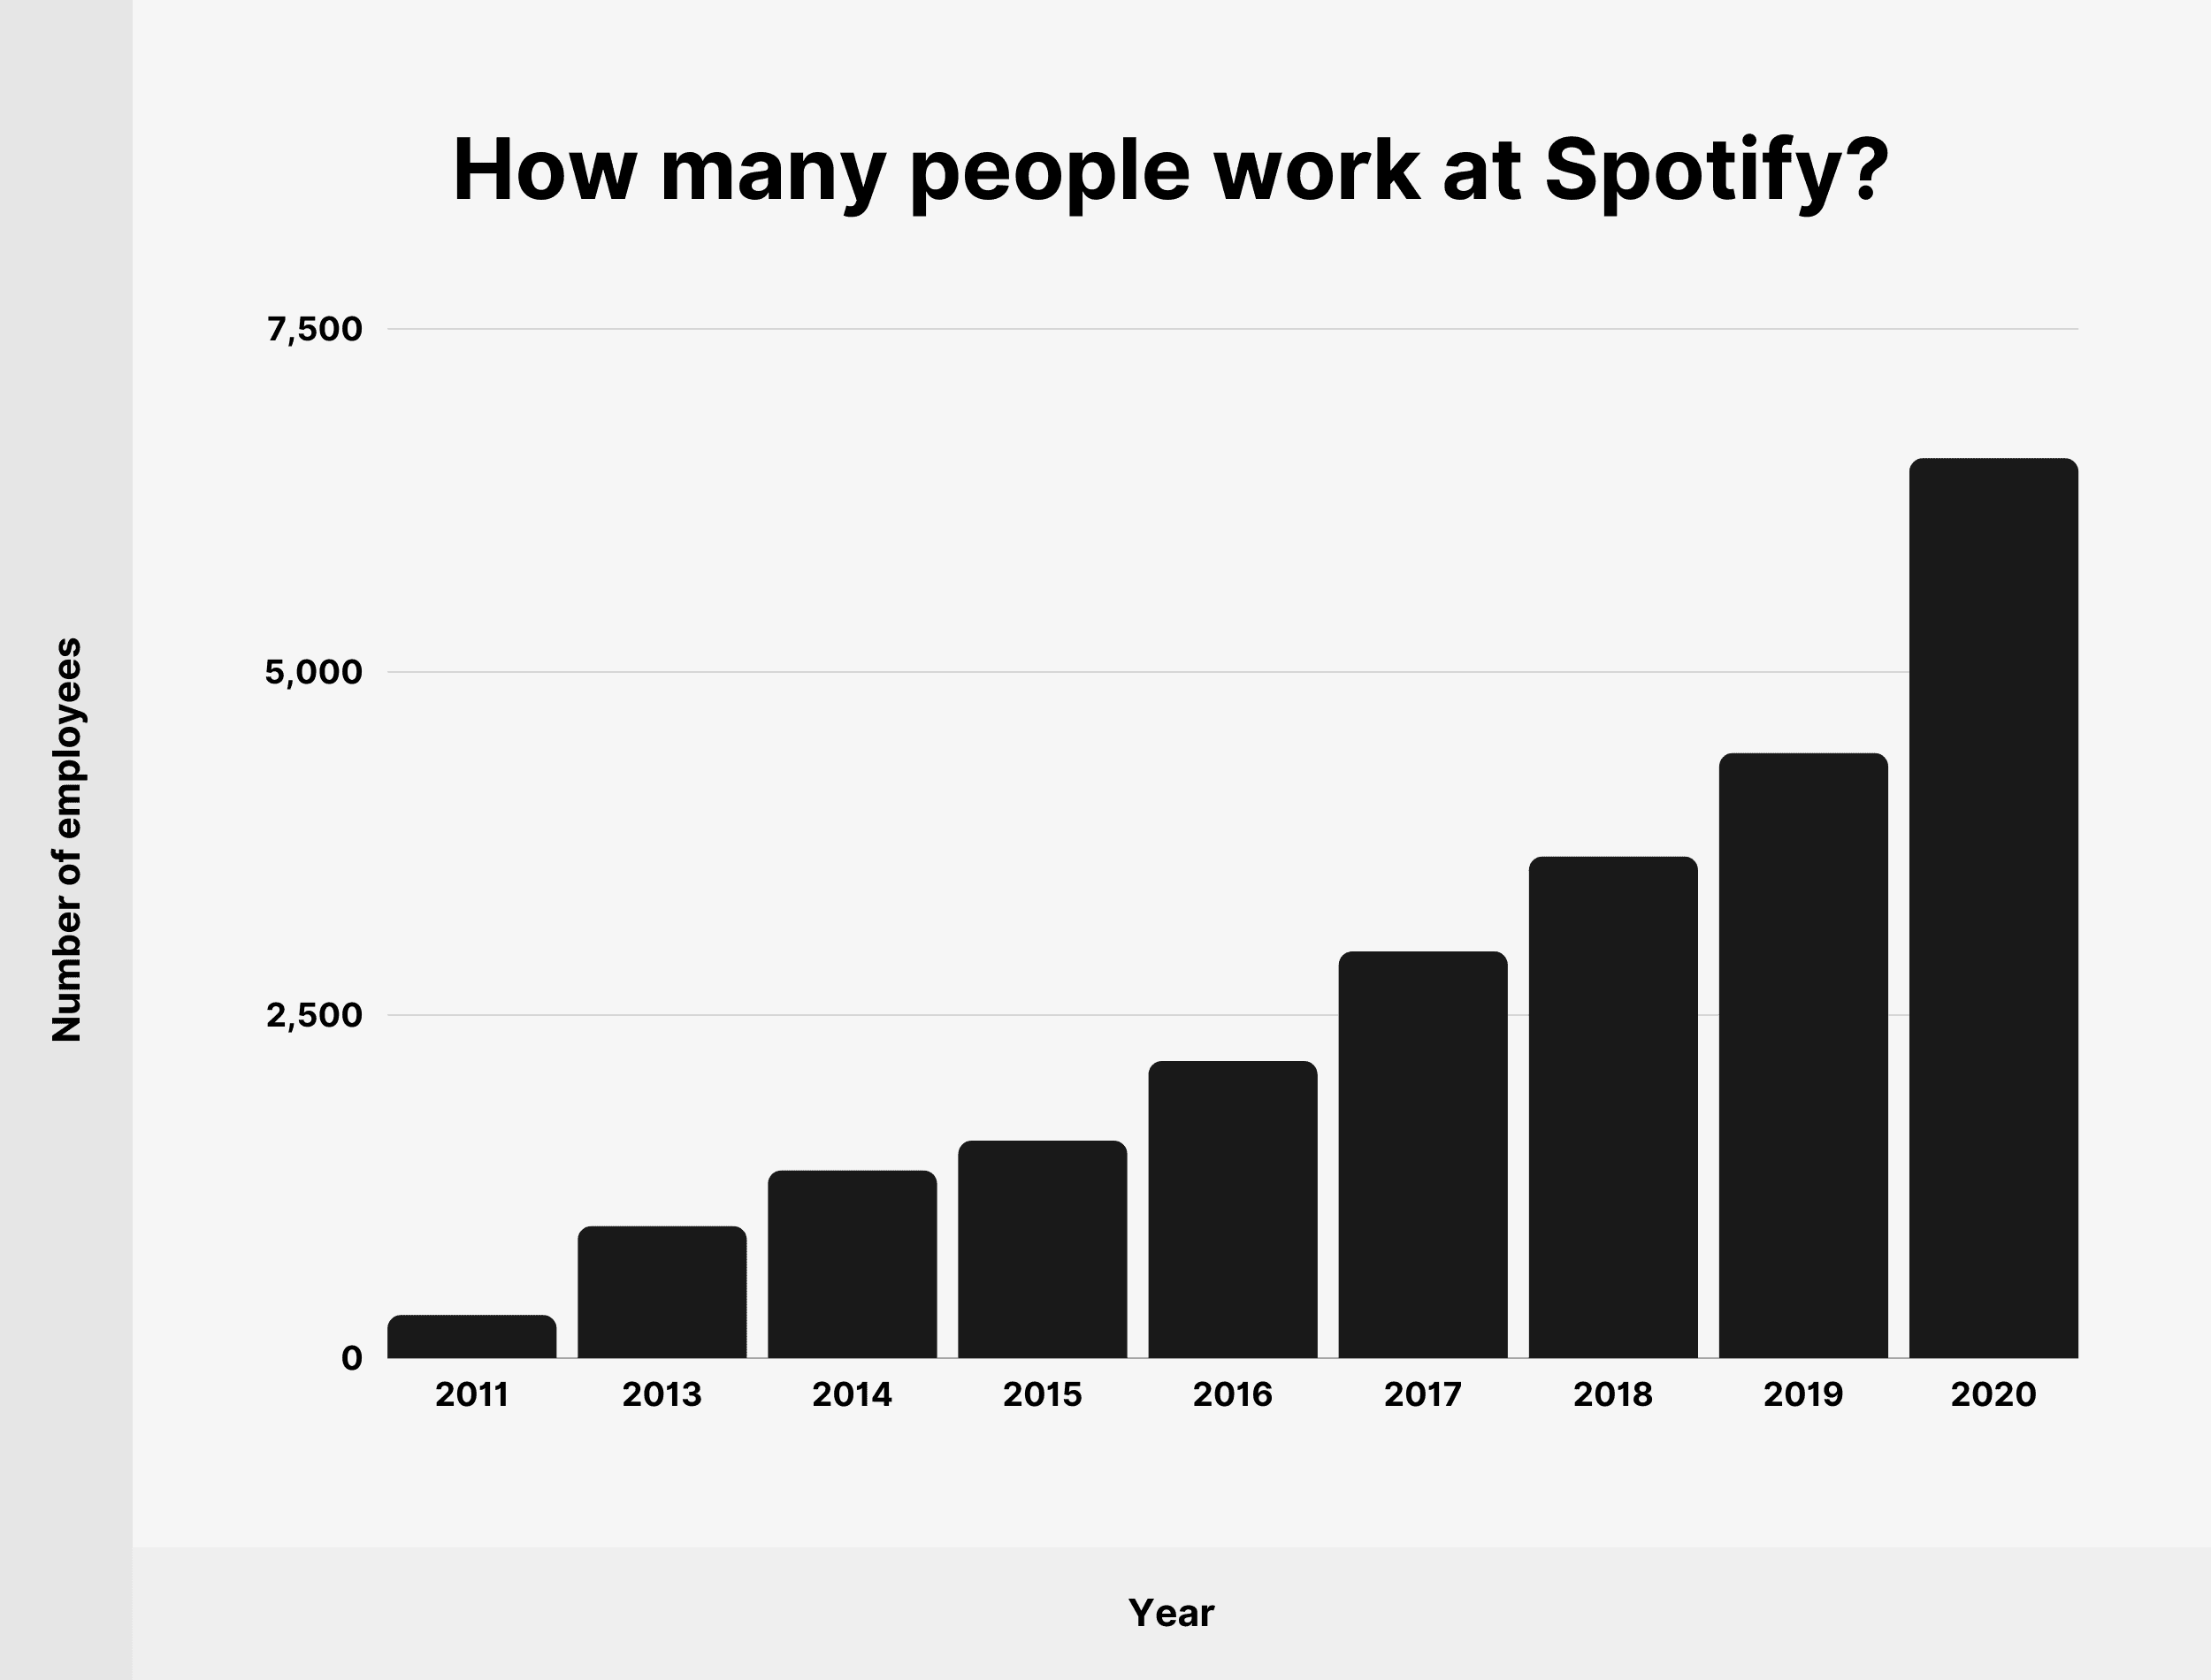 How many people work at Spotify?